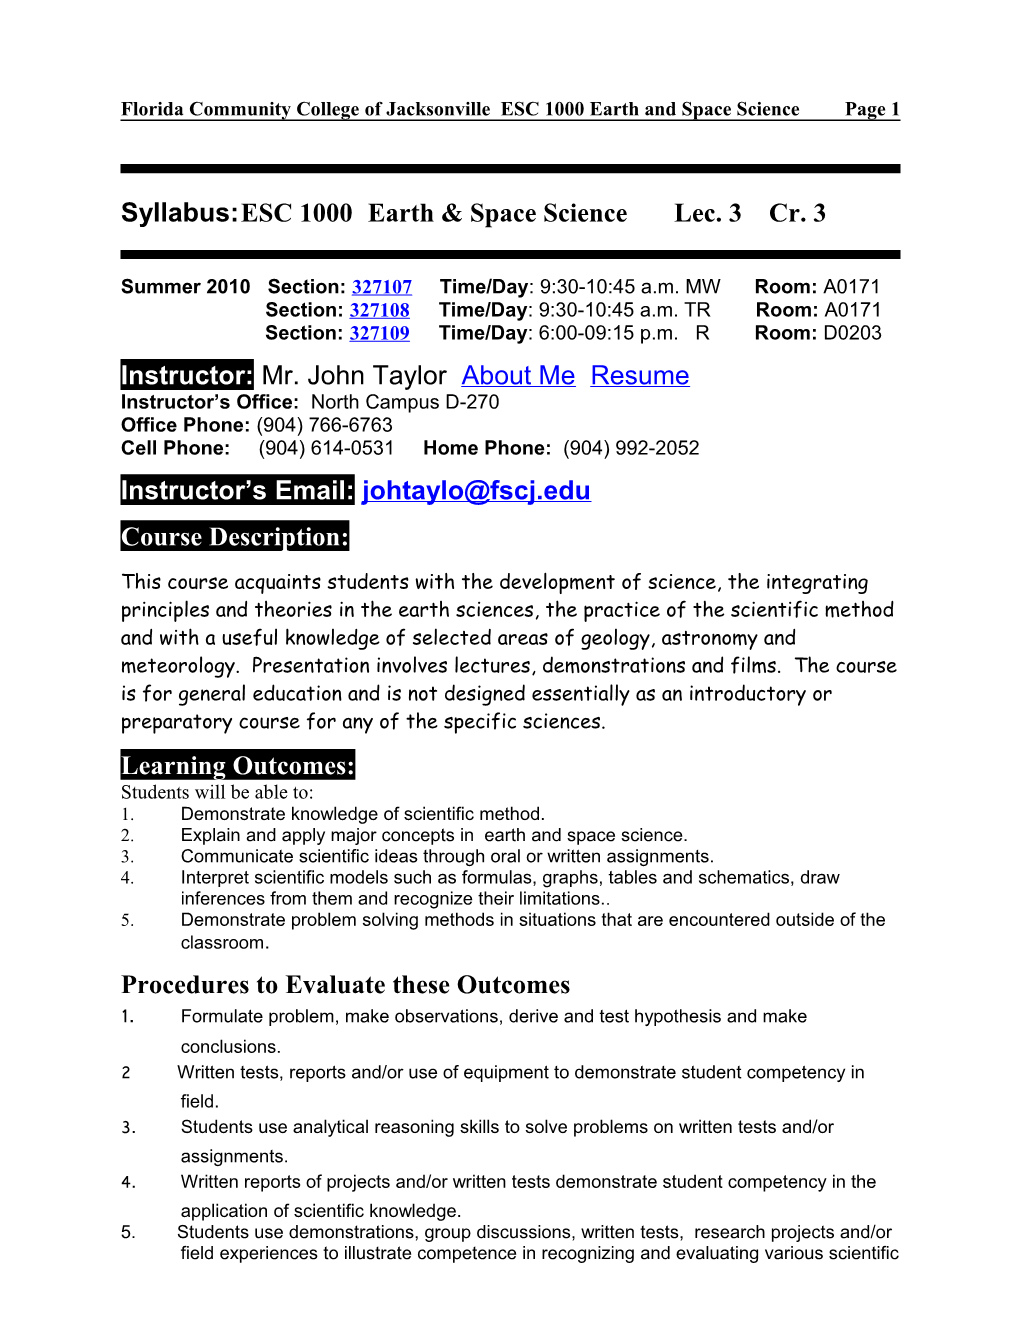 Florida Community College of Jacksonville ESC 1000 Earth and Space Sciencepage 1